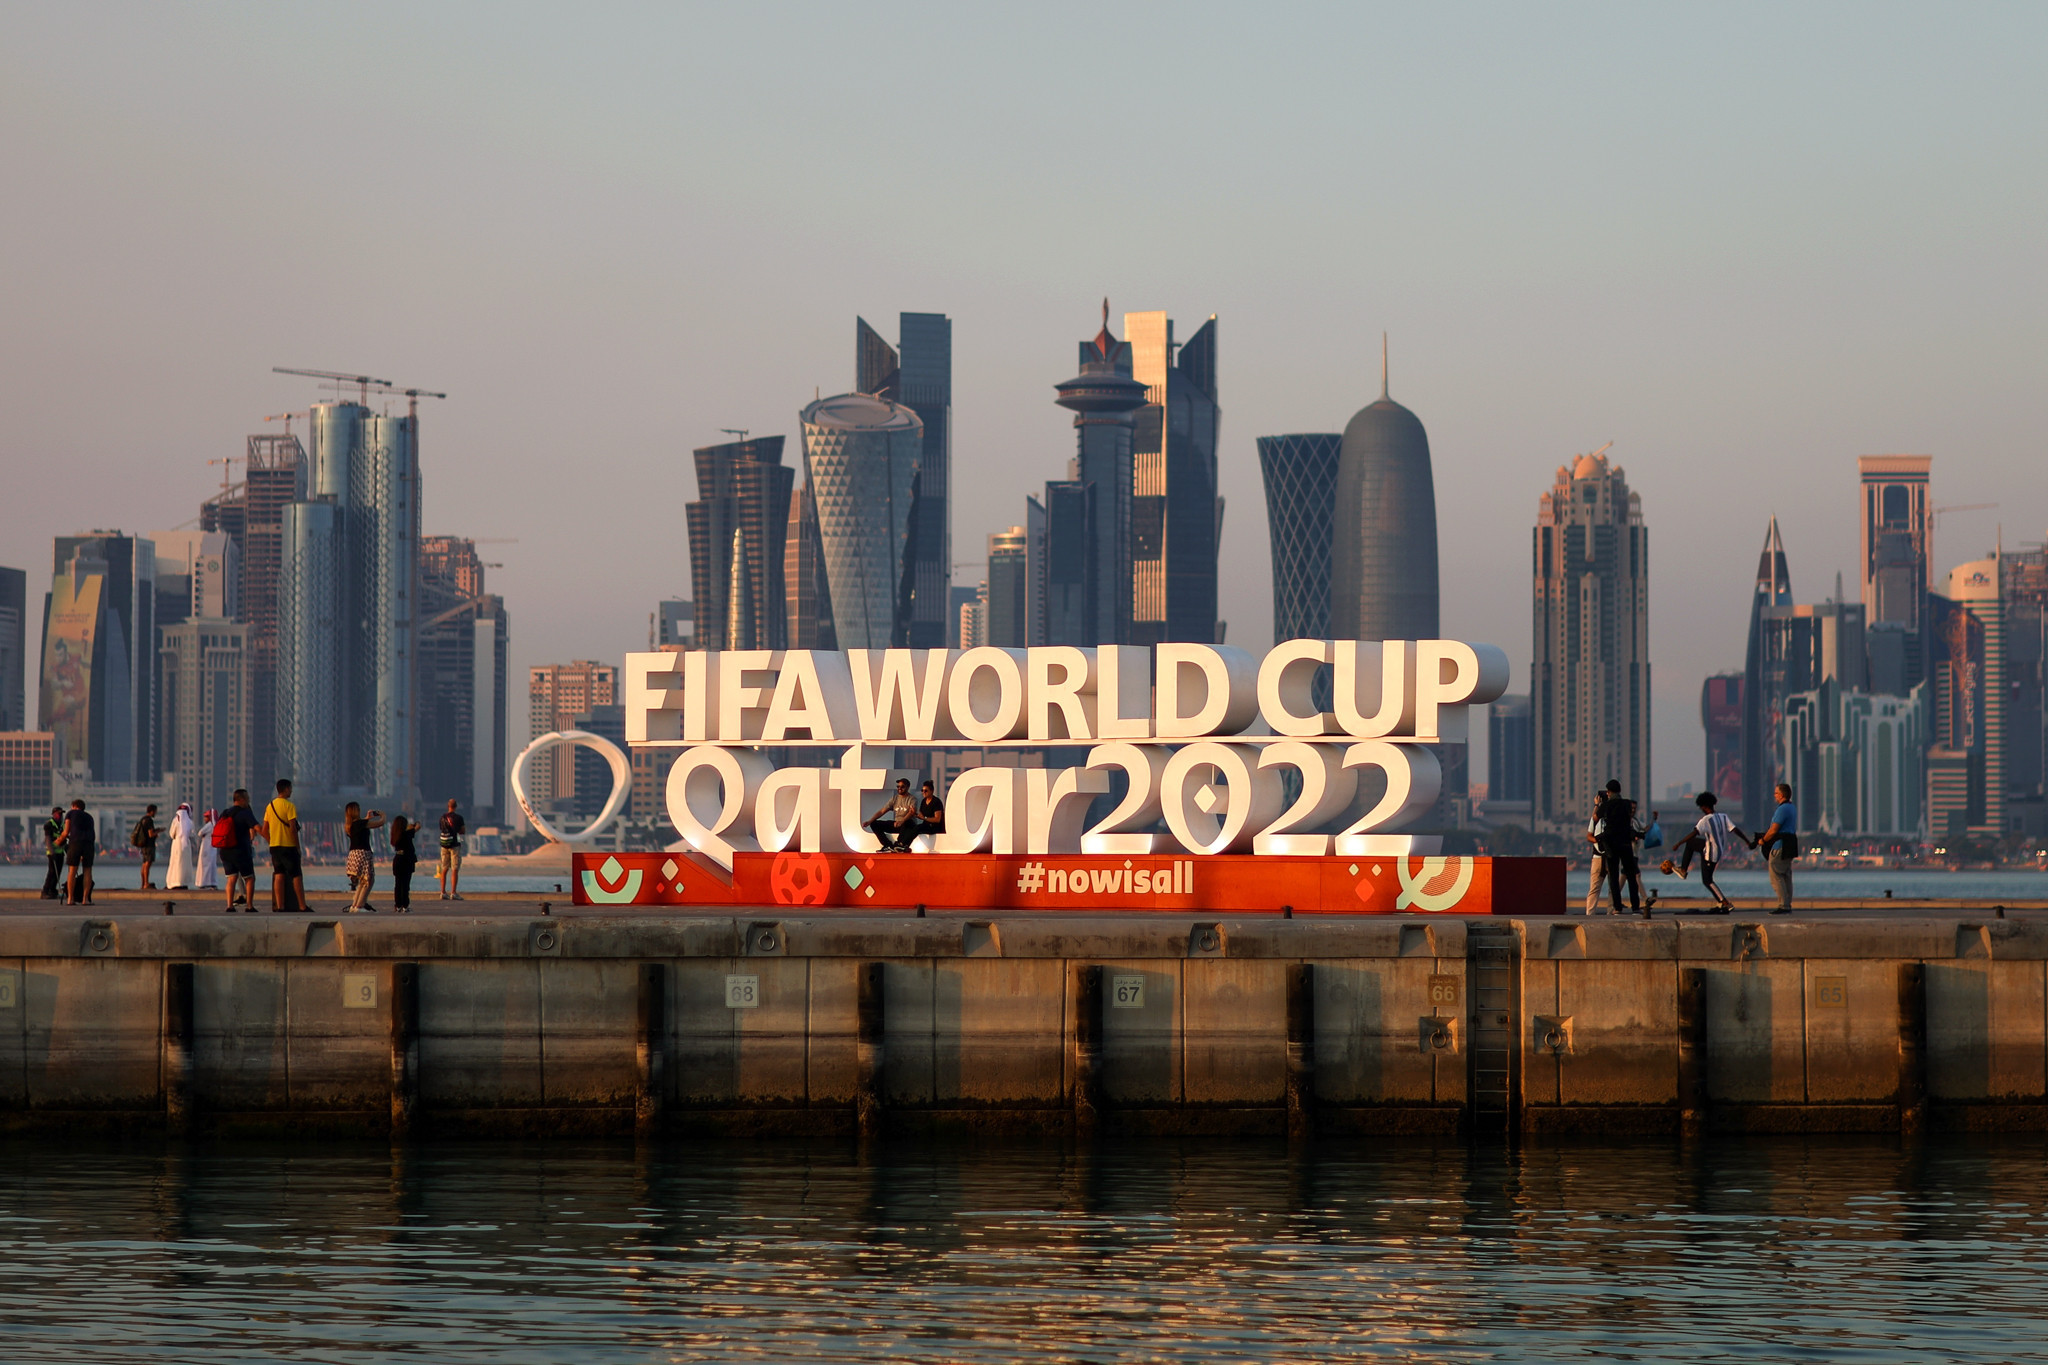 Norway Football Federation President Lise Klaveness has called for a full analysis of the death toll related to the Qatar 2022 World Cup ©Getty Images 